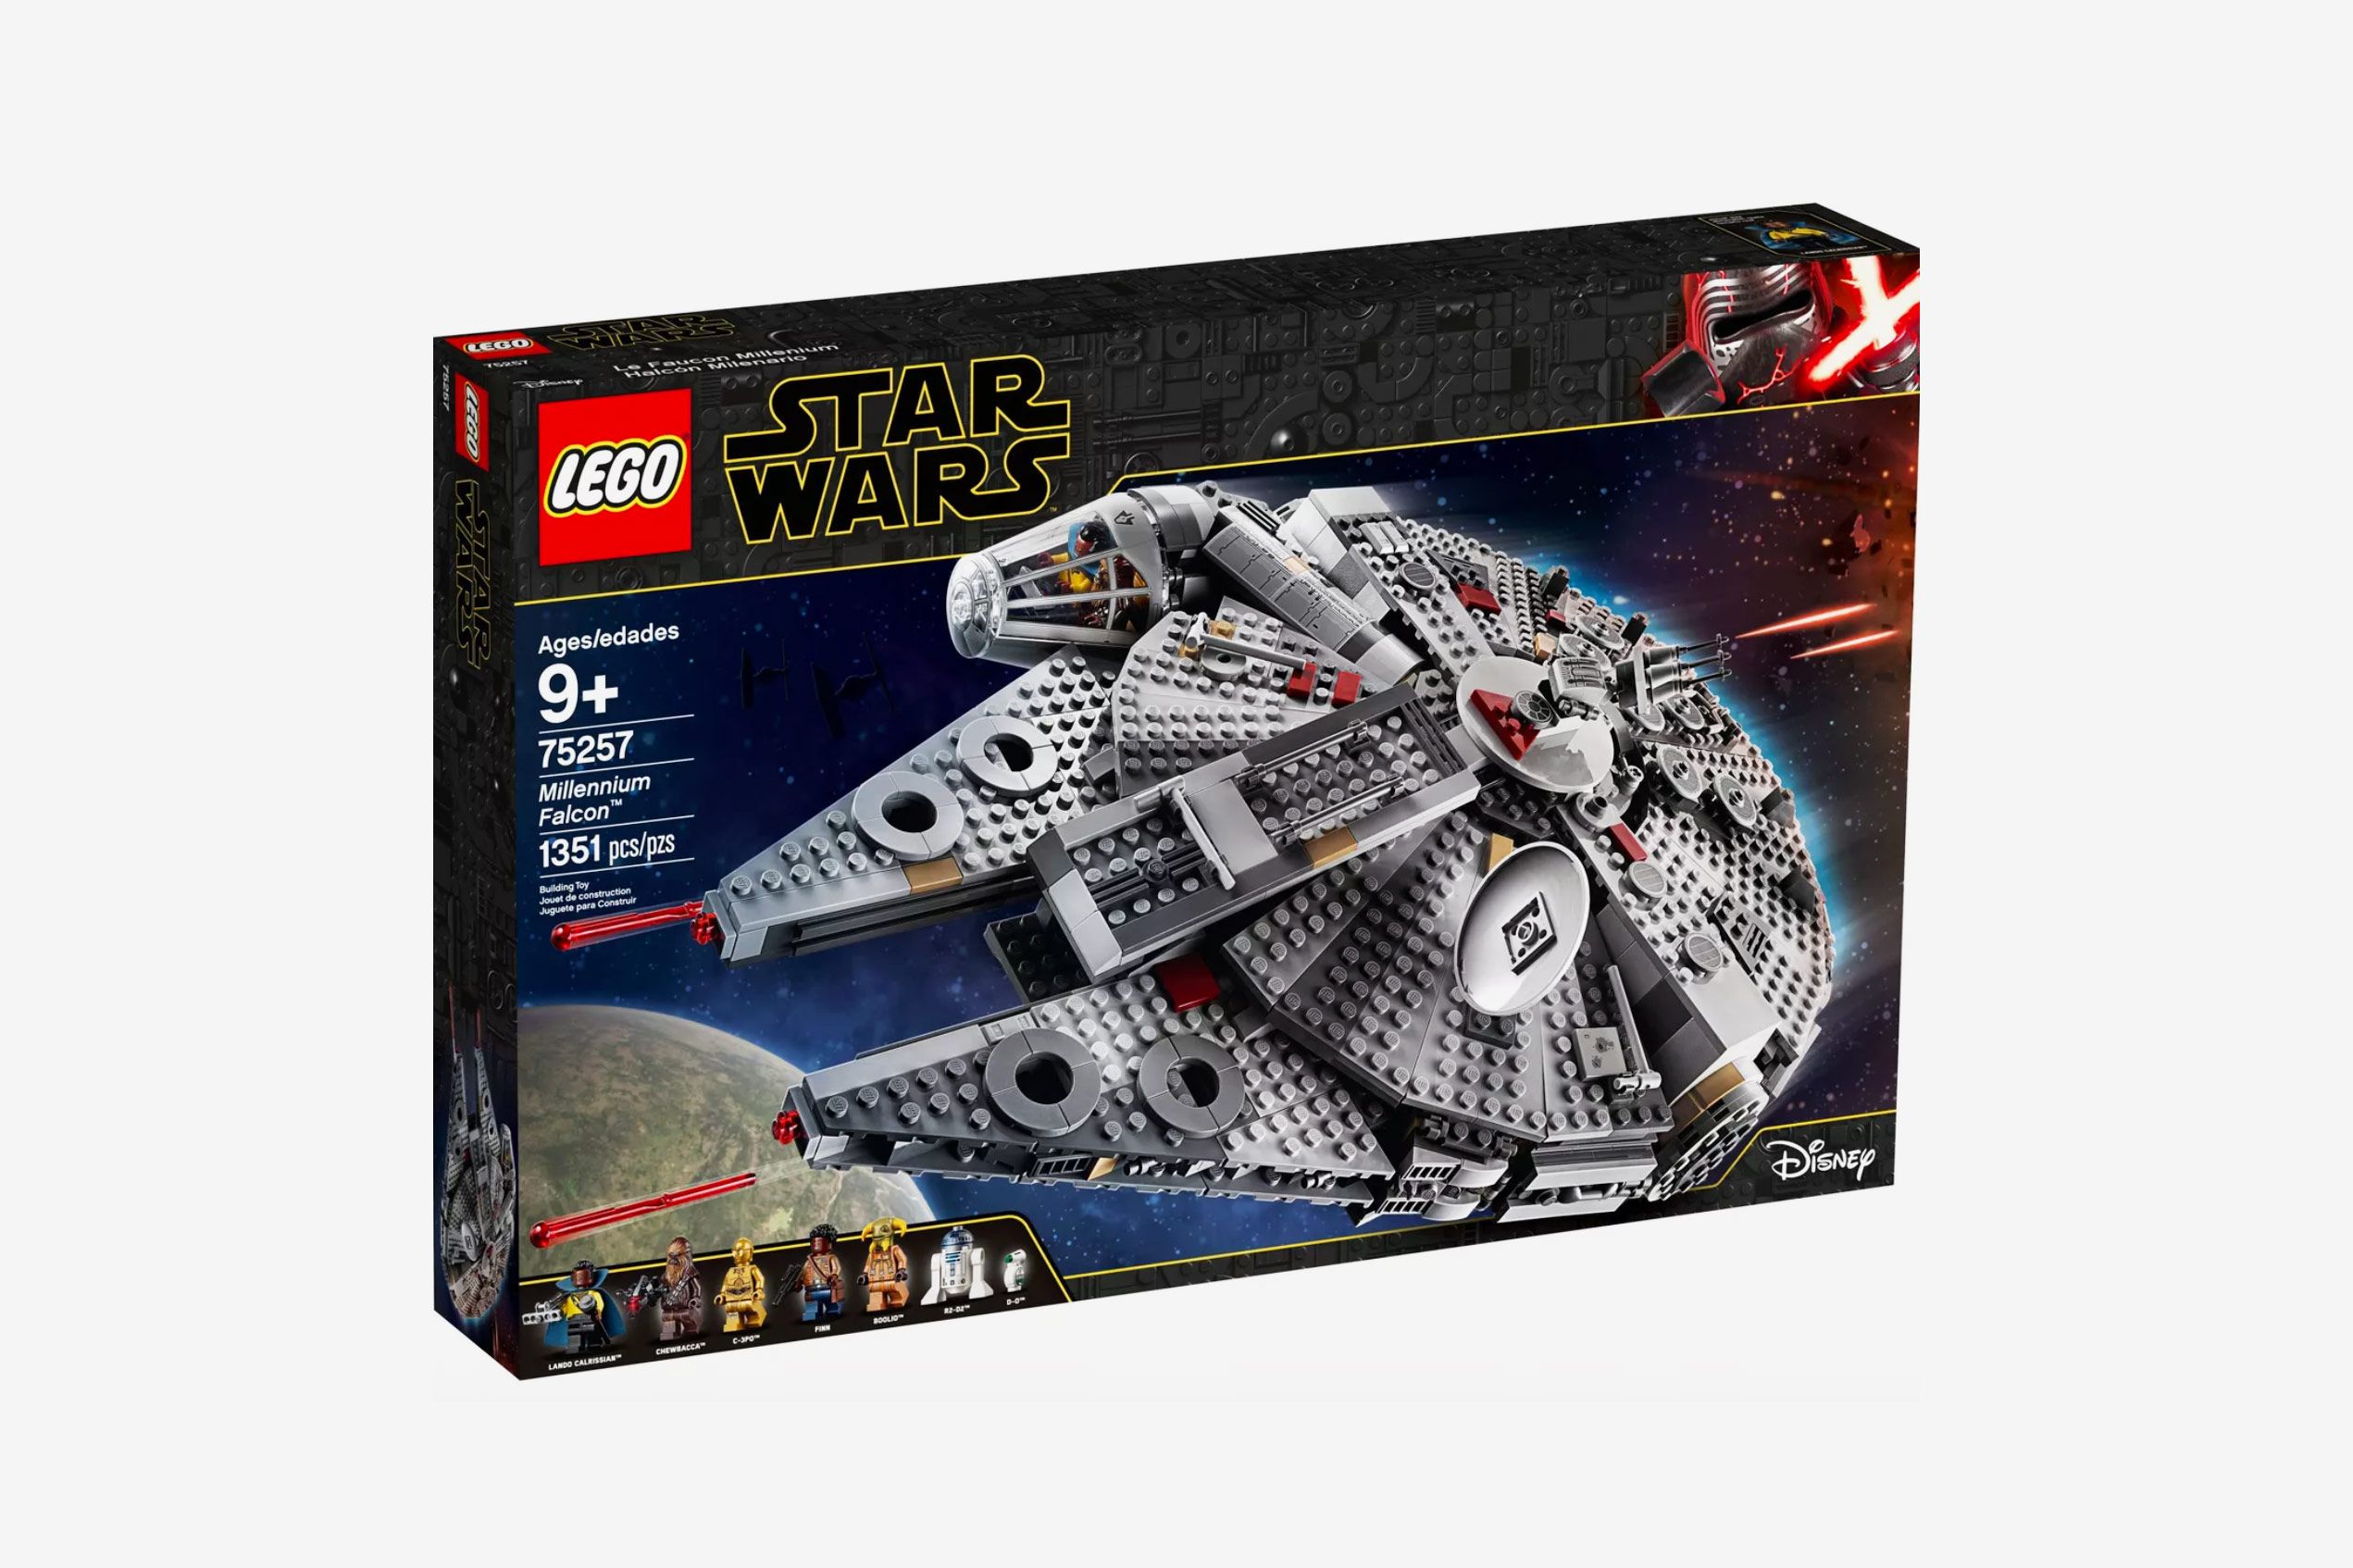 27 Best 'Star Wars' Gifts in 2023, From Legos to Slippers